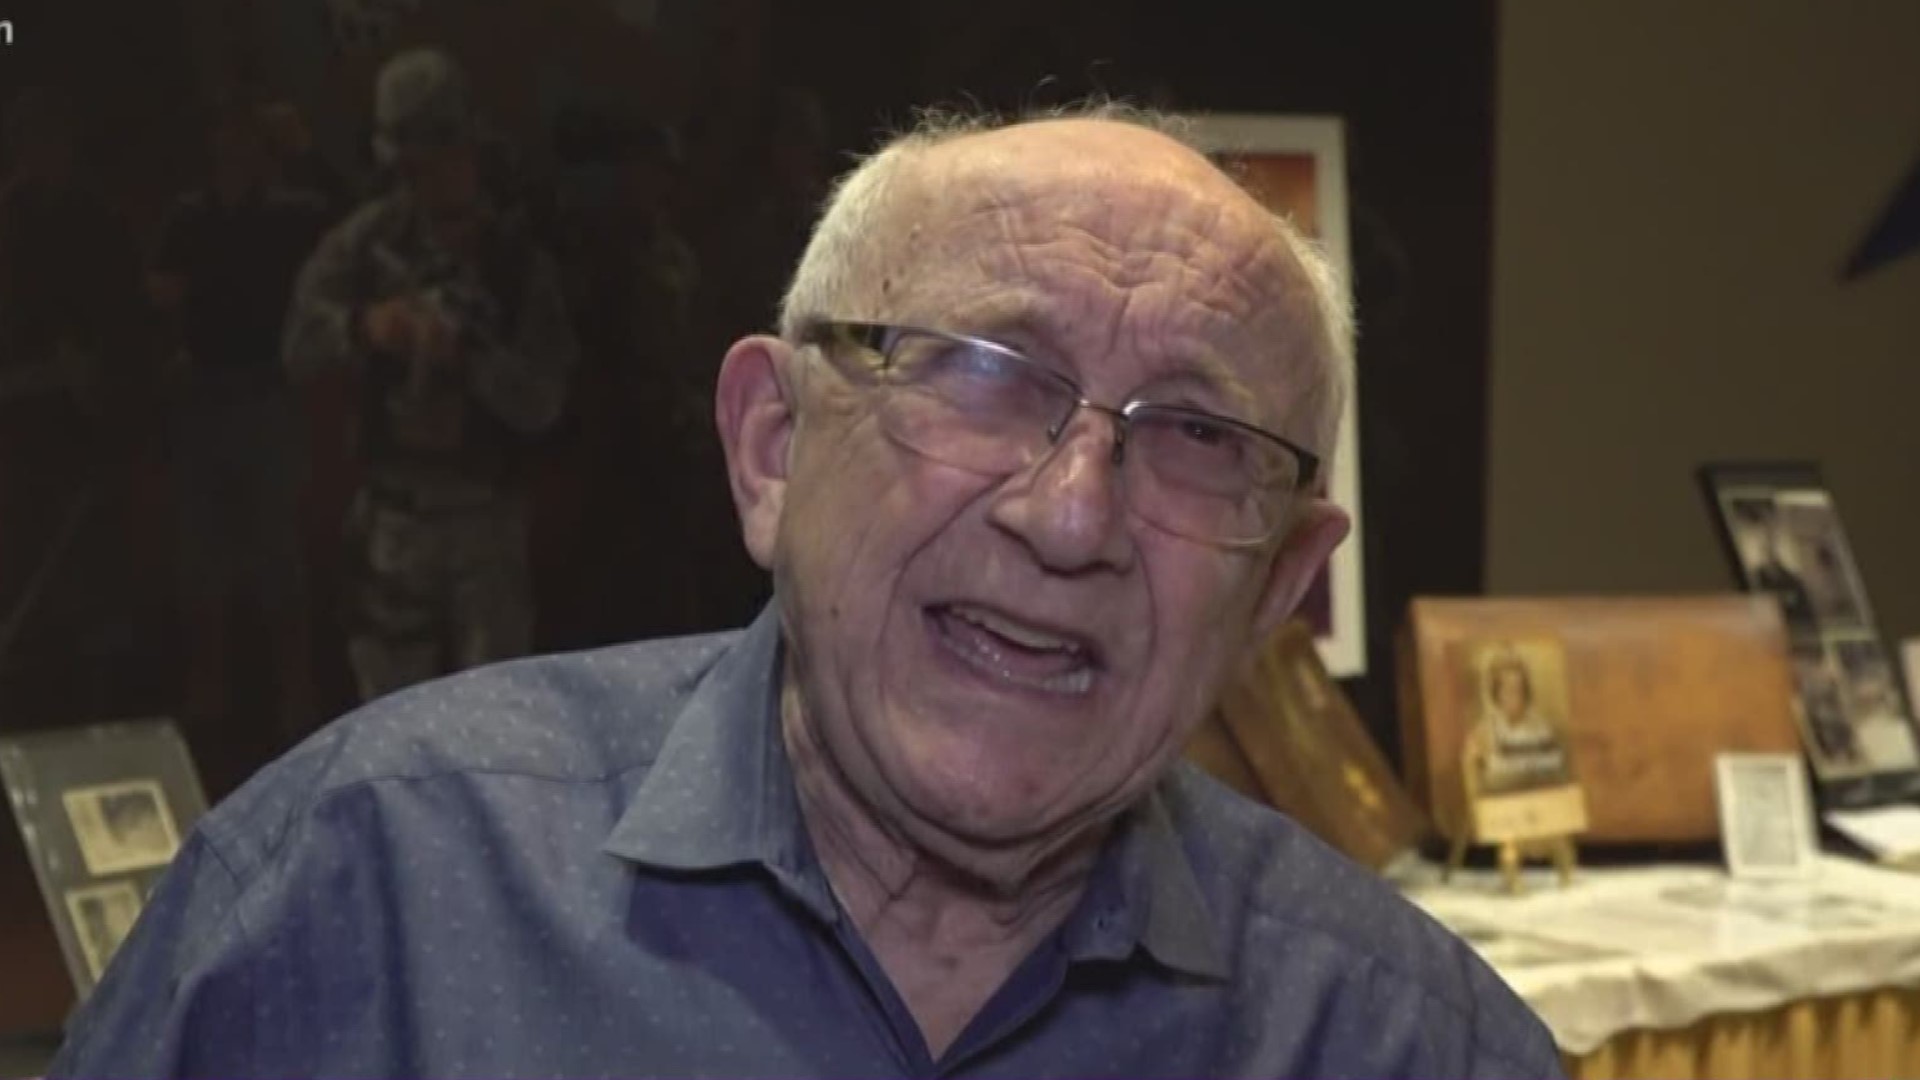 After six years in captivity, Holocaust survivor Max Glauben was liberated by the U.S. Army on April 23, 1945. He later attended basic training at Fort Hood and served two years in the Army during the Korean War.